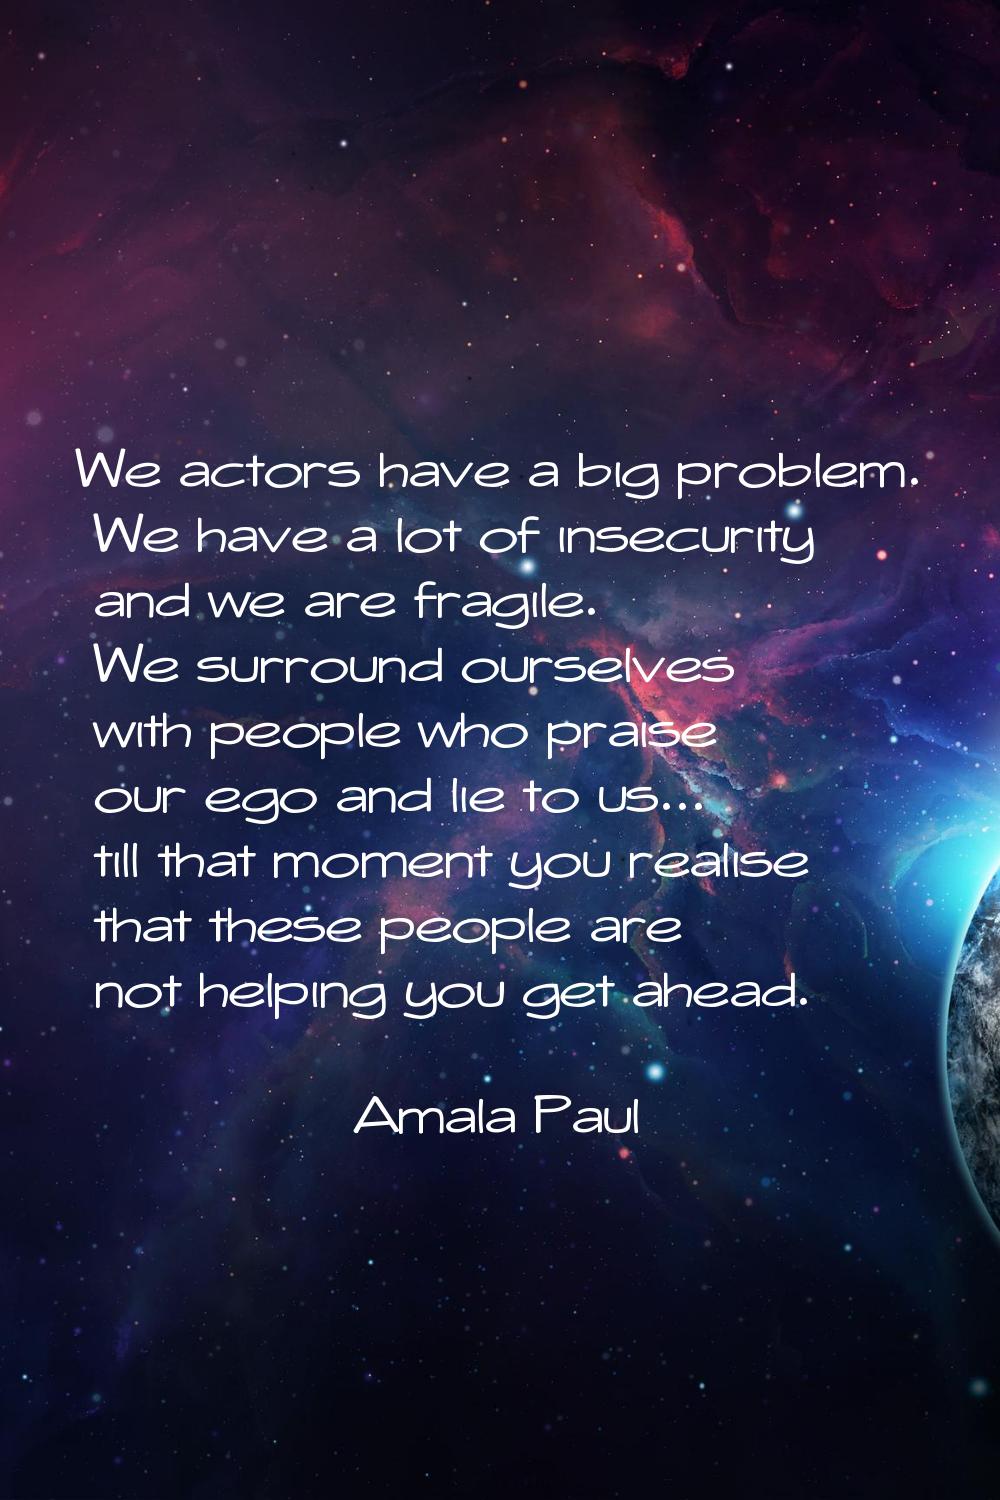 We actors have a big problem. We have a lot of insecurity and we are fragile. We surround ourselves